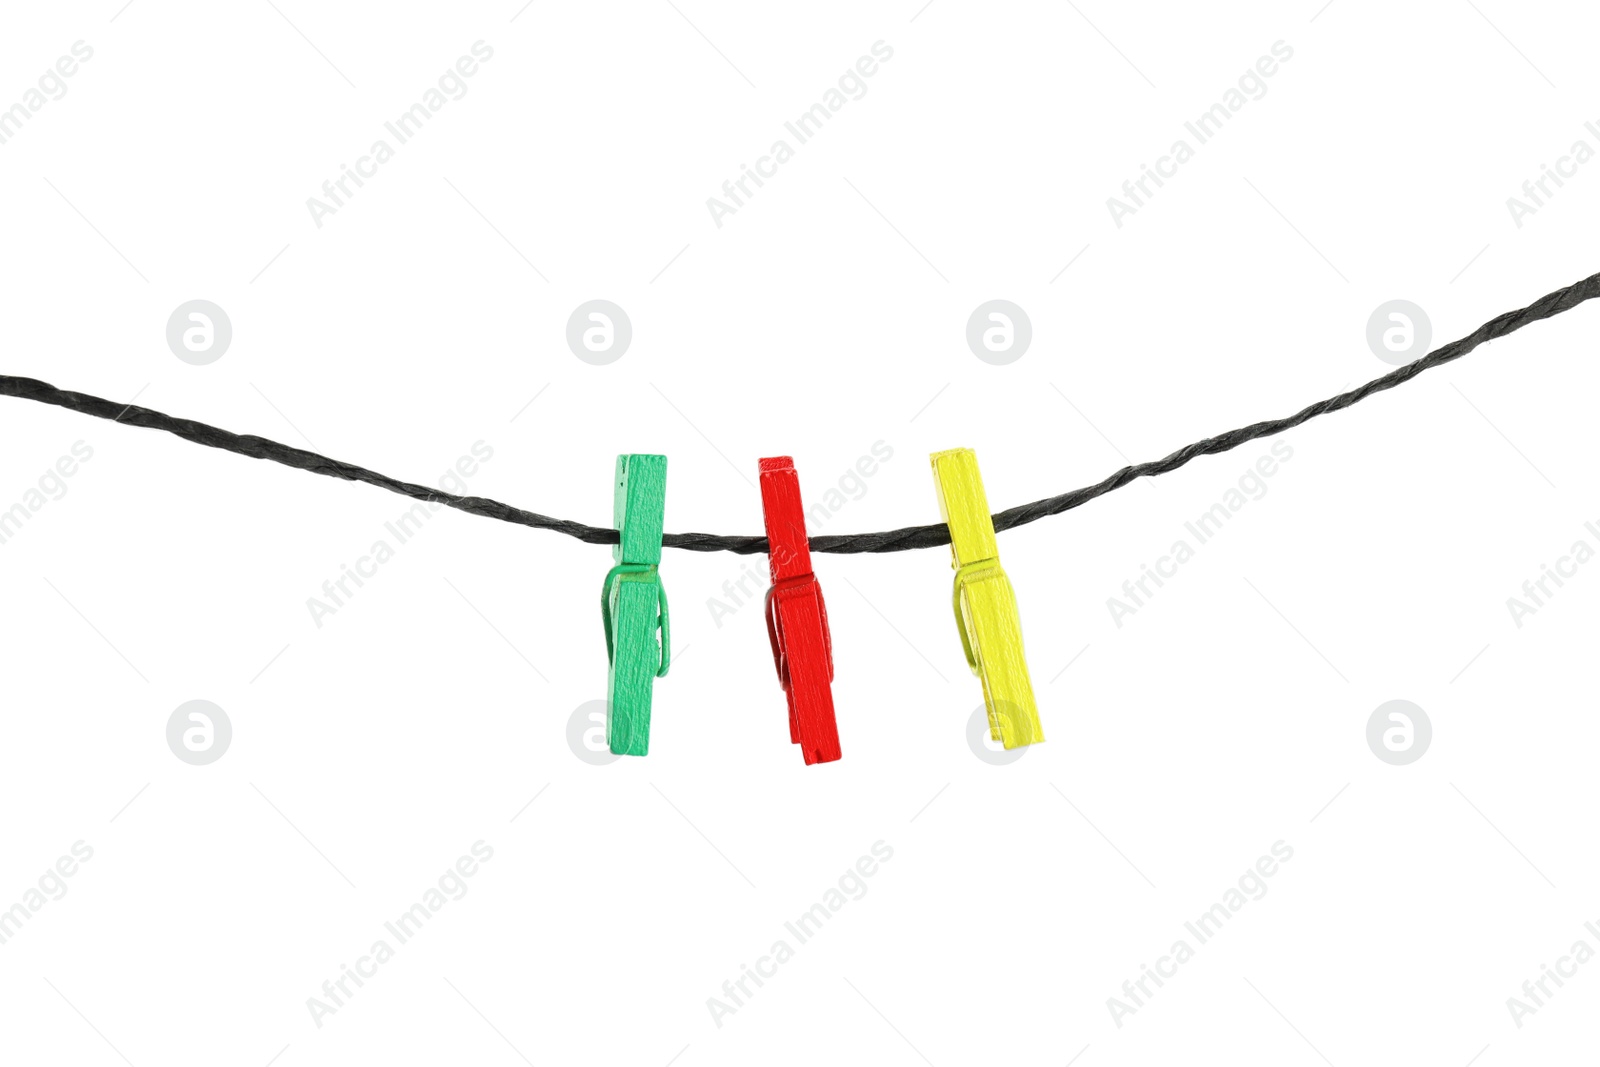 Photo of Colorful wooden clothespins on rope against white background